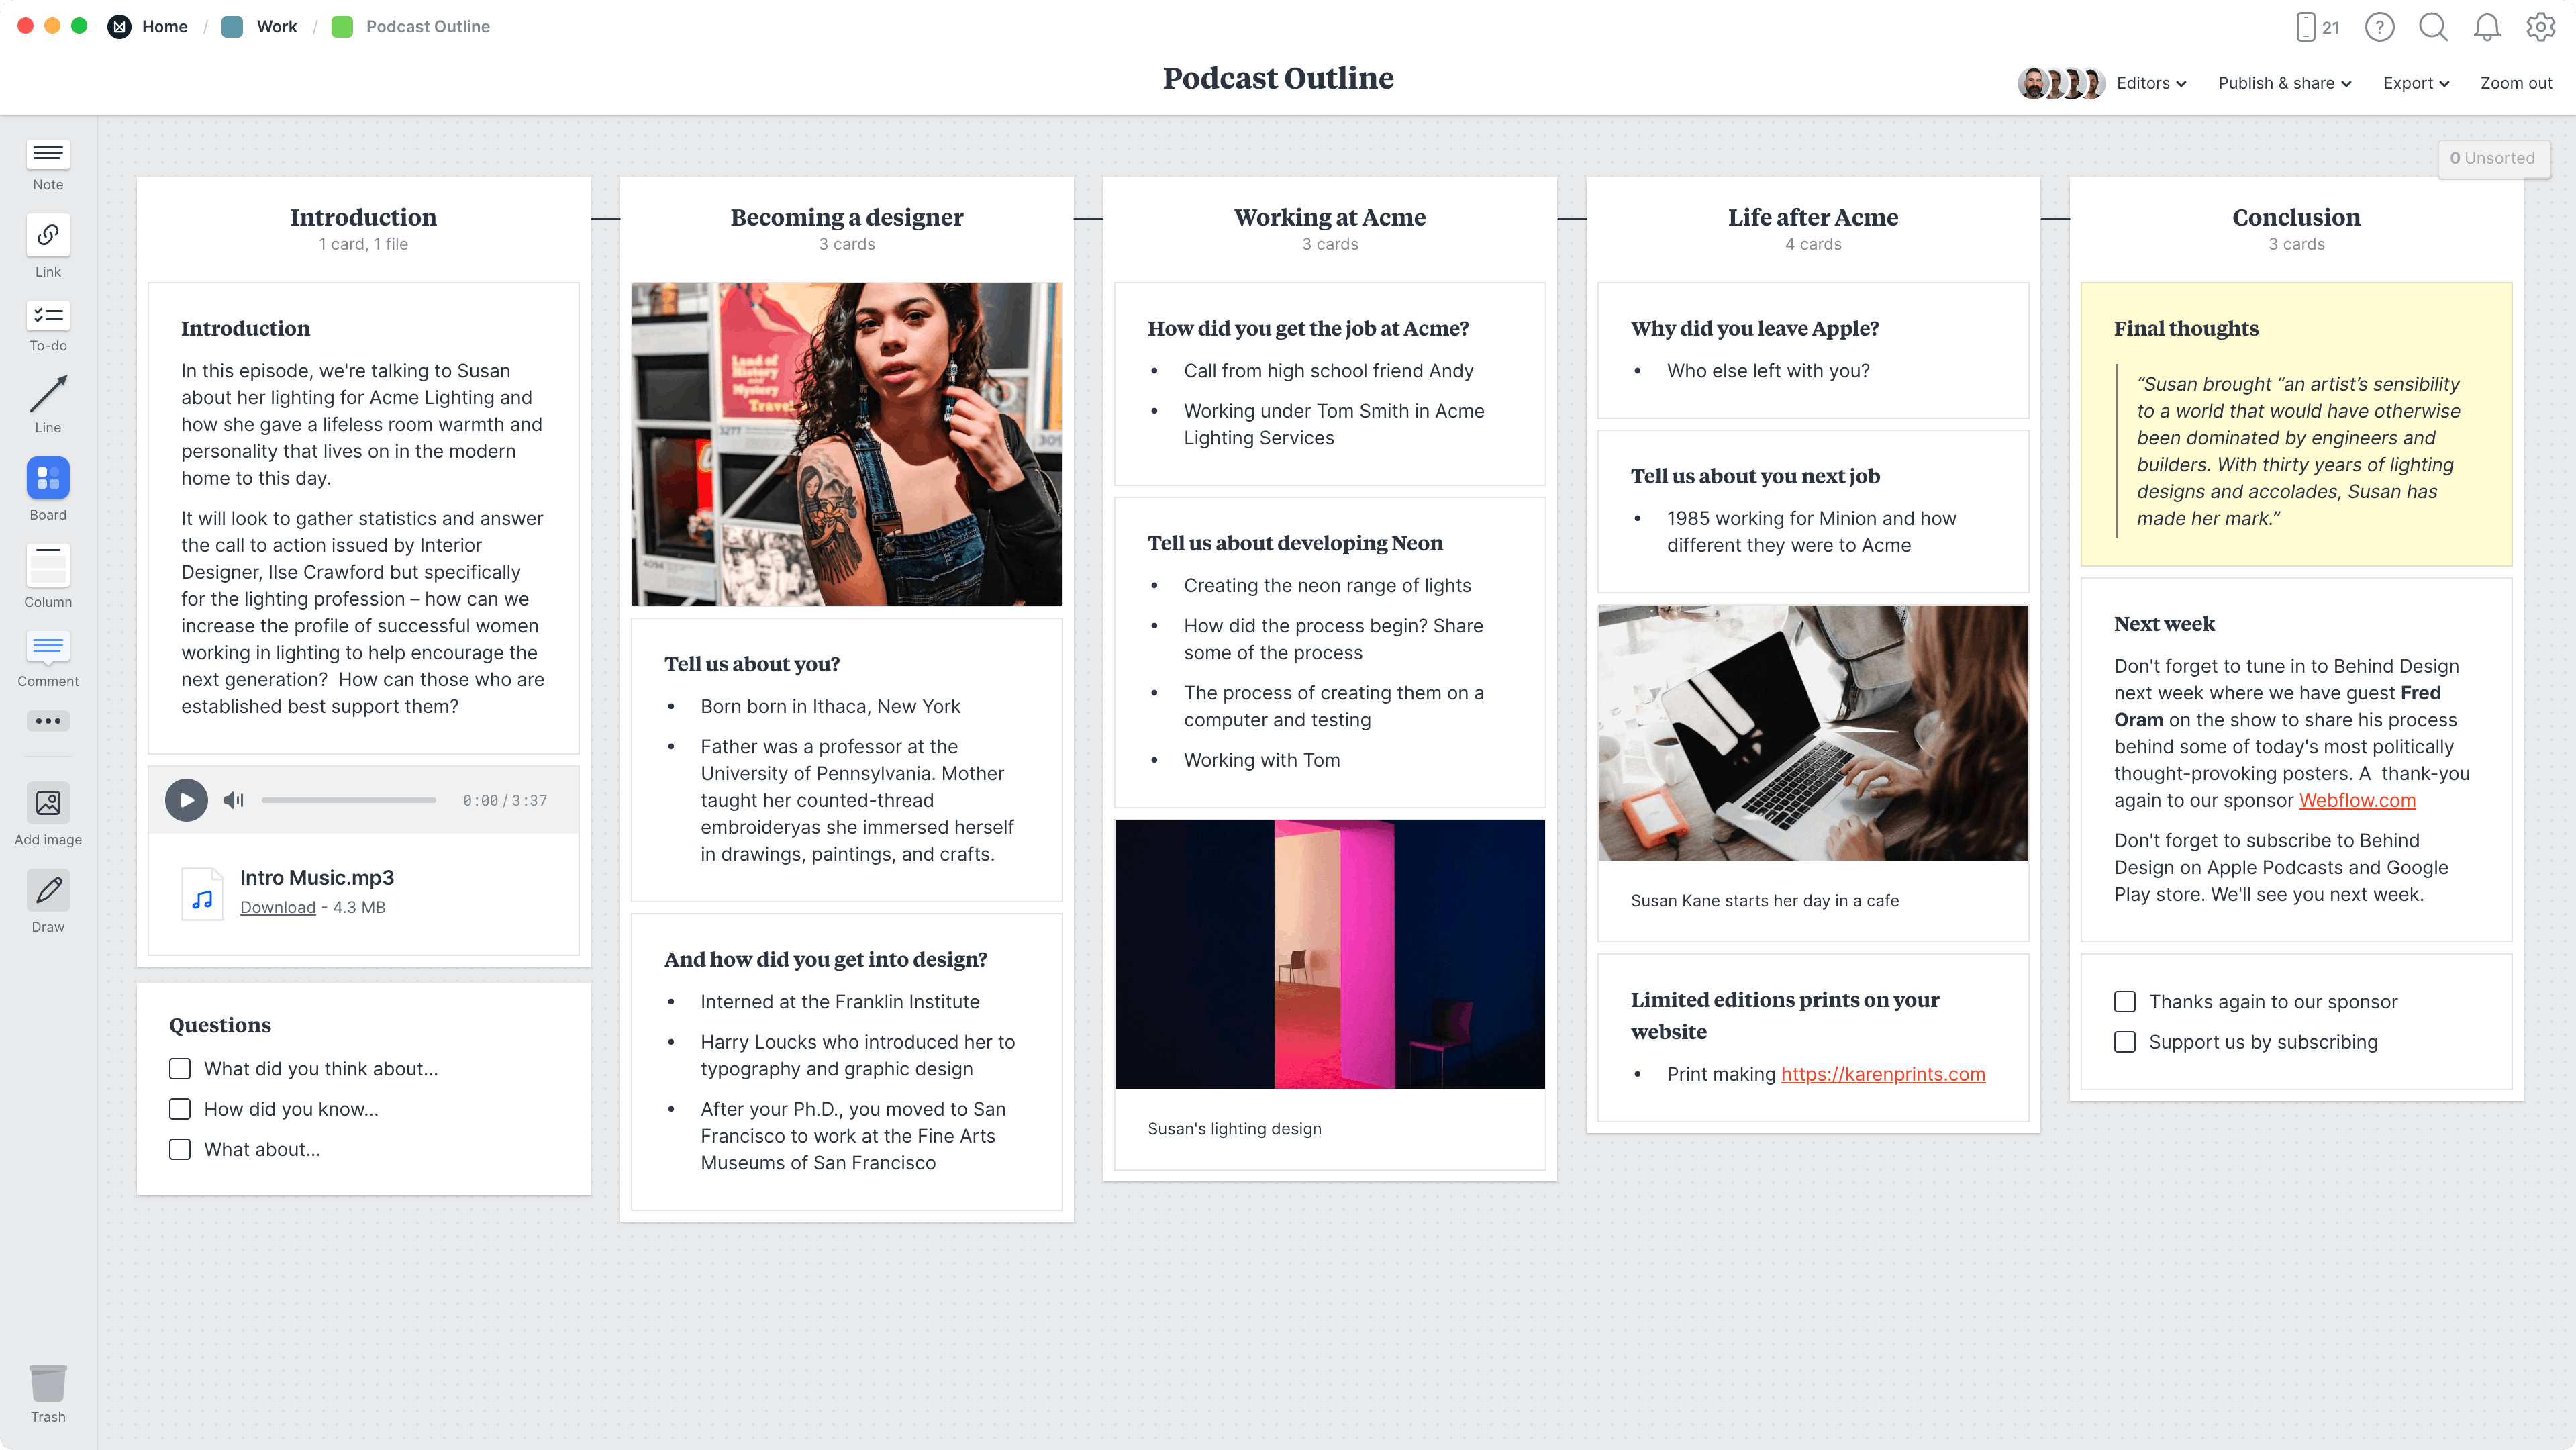 Podcast Outline Template, within the Milanote app